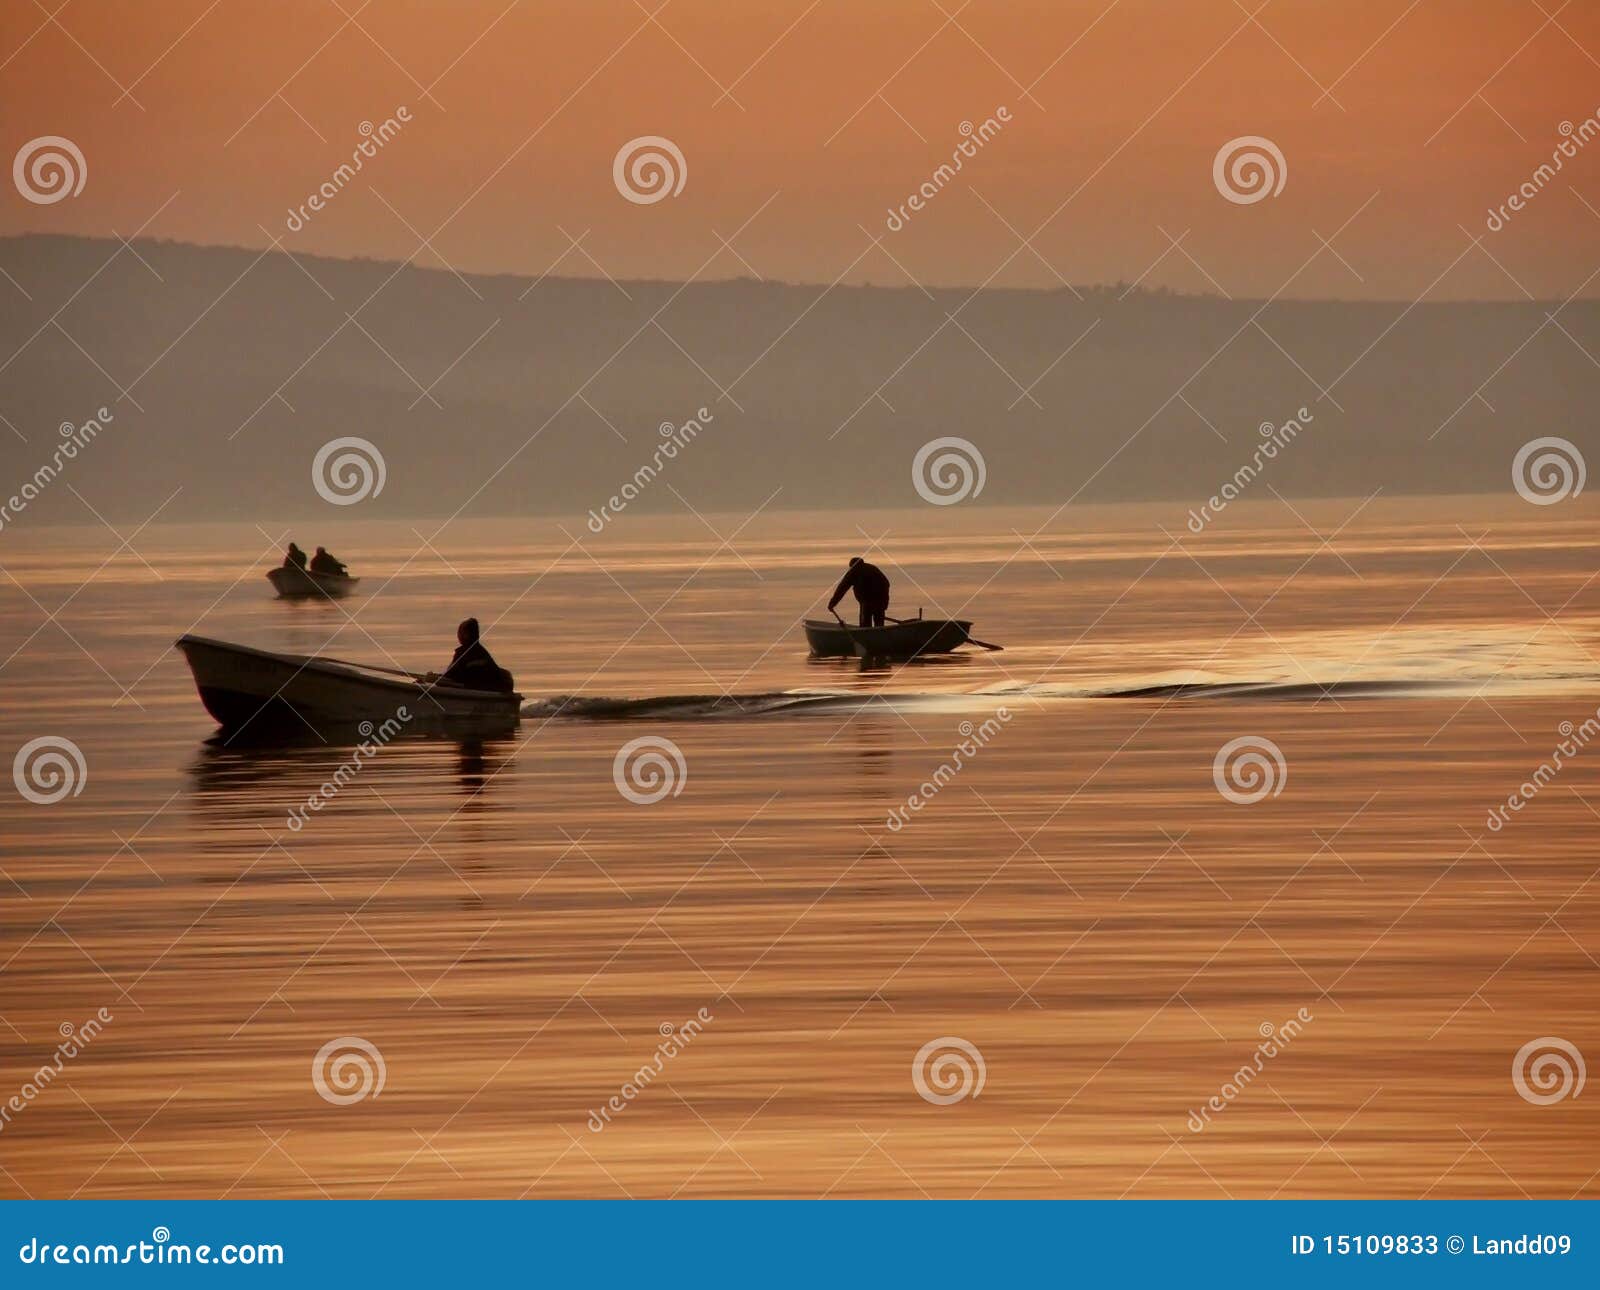 boats in haze and sunset